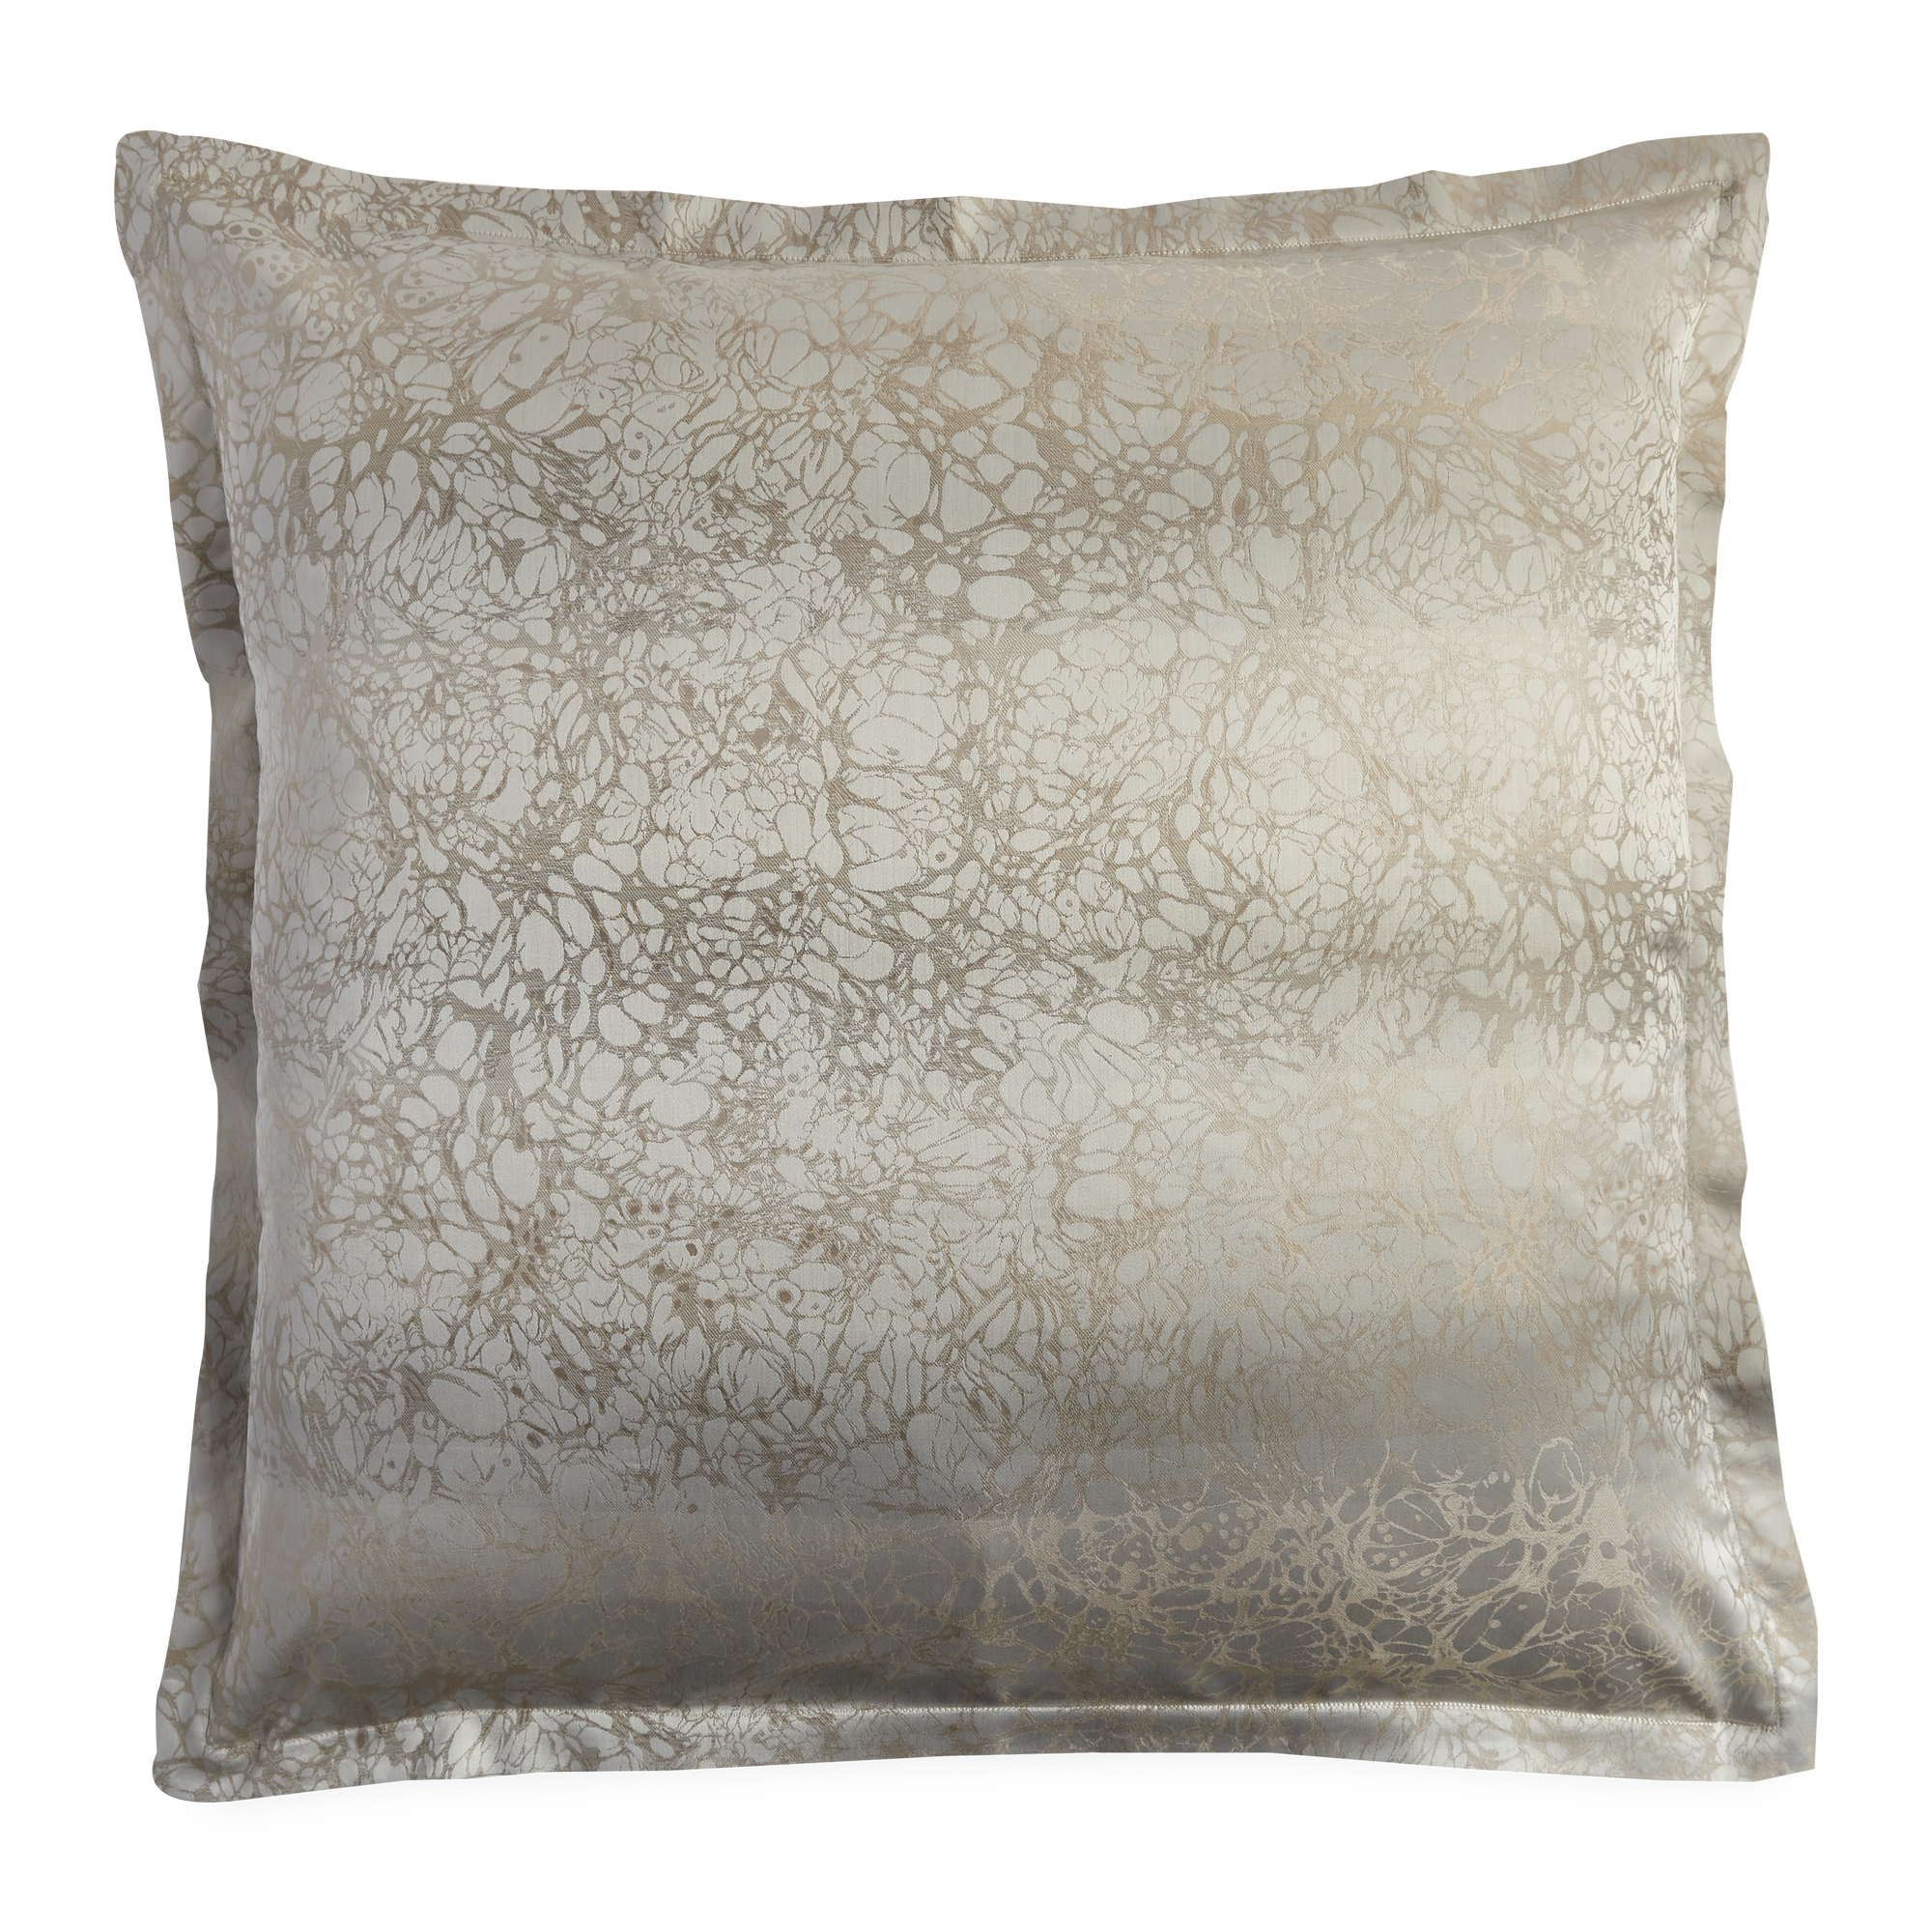 Produced in Italy exclusively for Elte, the Petal Collection's subtle floral motifs are blended in a neutral ivory palette, woven in a yarn dyed sateen jacquard.